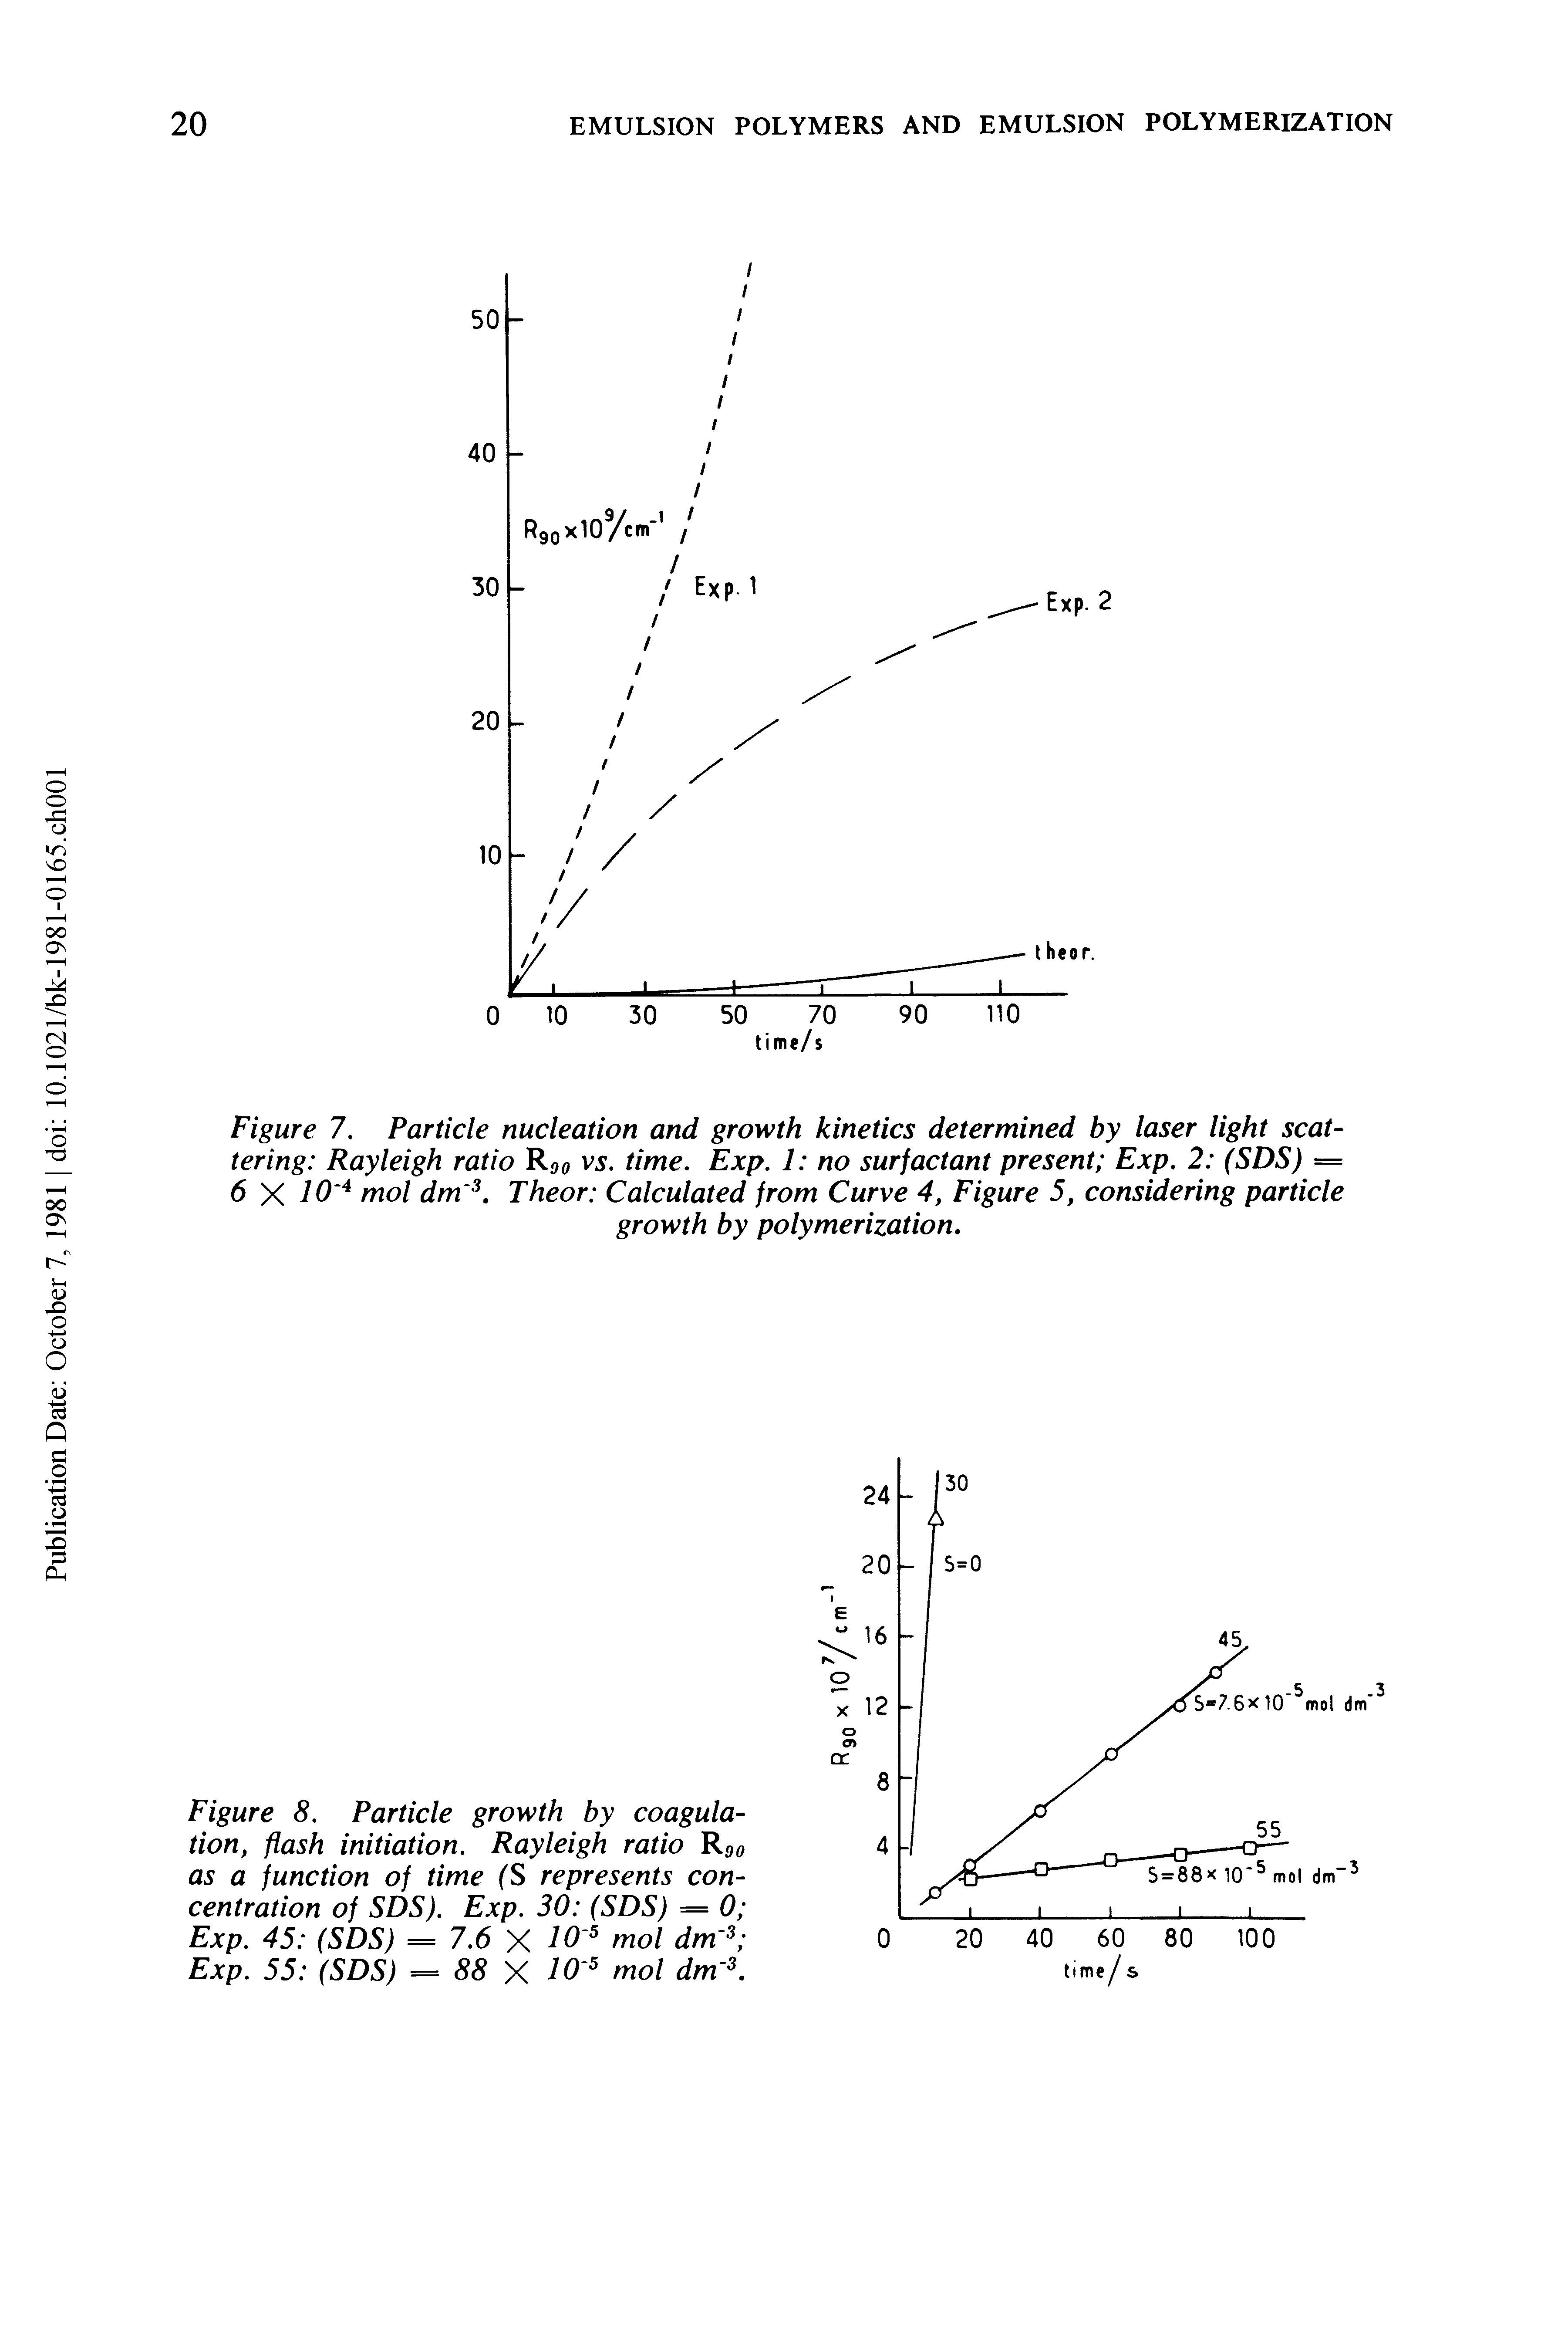 Figure 7. Particle nucleation and growth kinetics determined by laser light scattering Rayleigh ratio vs. time. Exp. 1 no surfactant present Exp. 2 (SDS) = 6 X 10 4 mol dm 3. Theor Calculated from Curve 4, Figure 5, considering particle growth by polymerization.